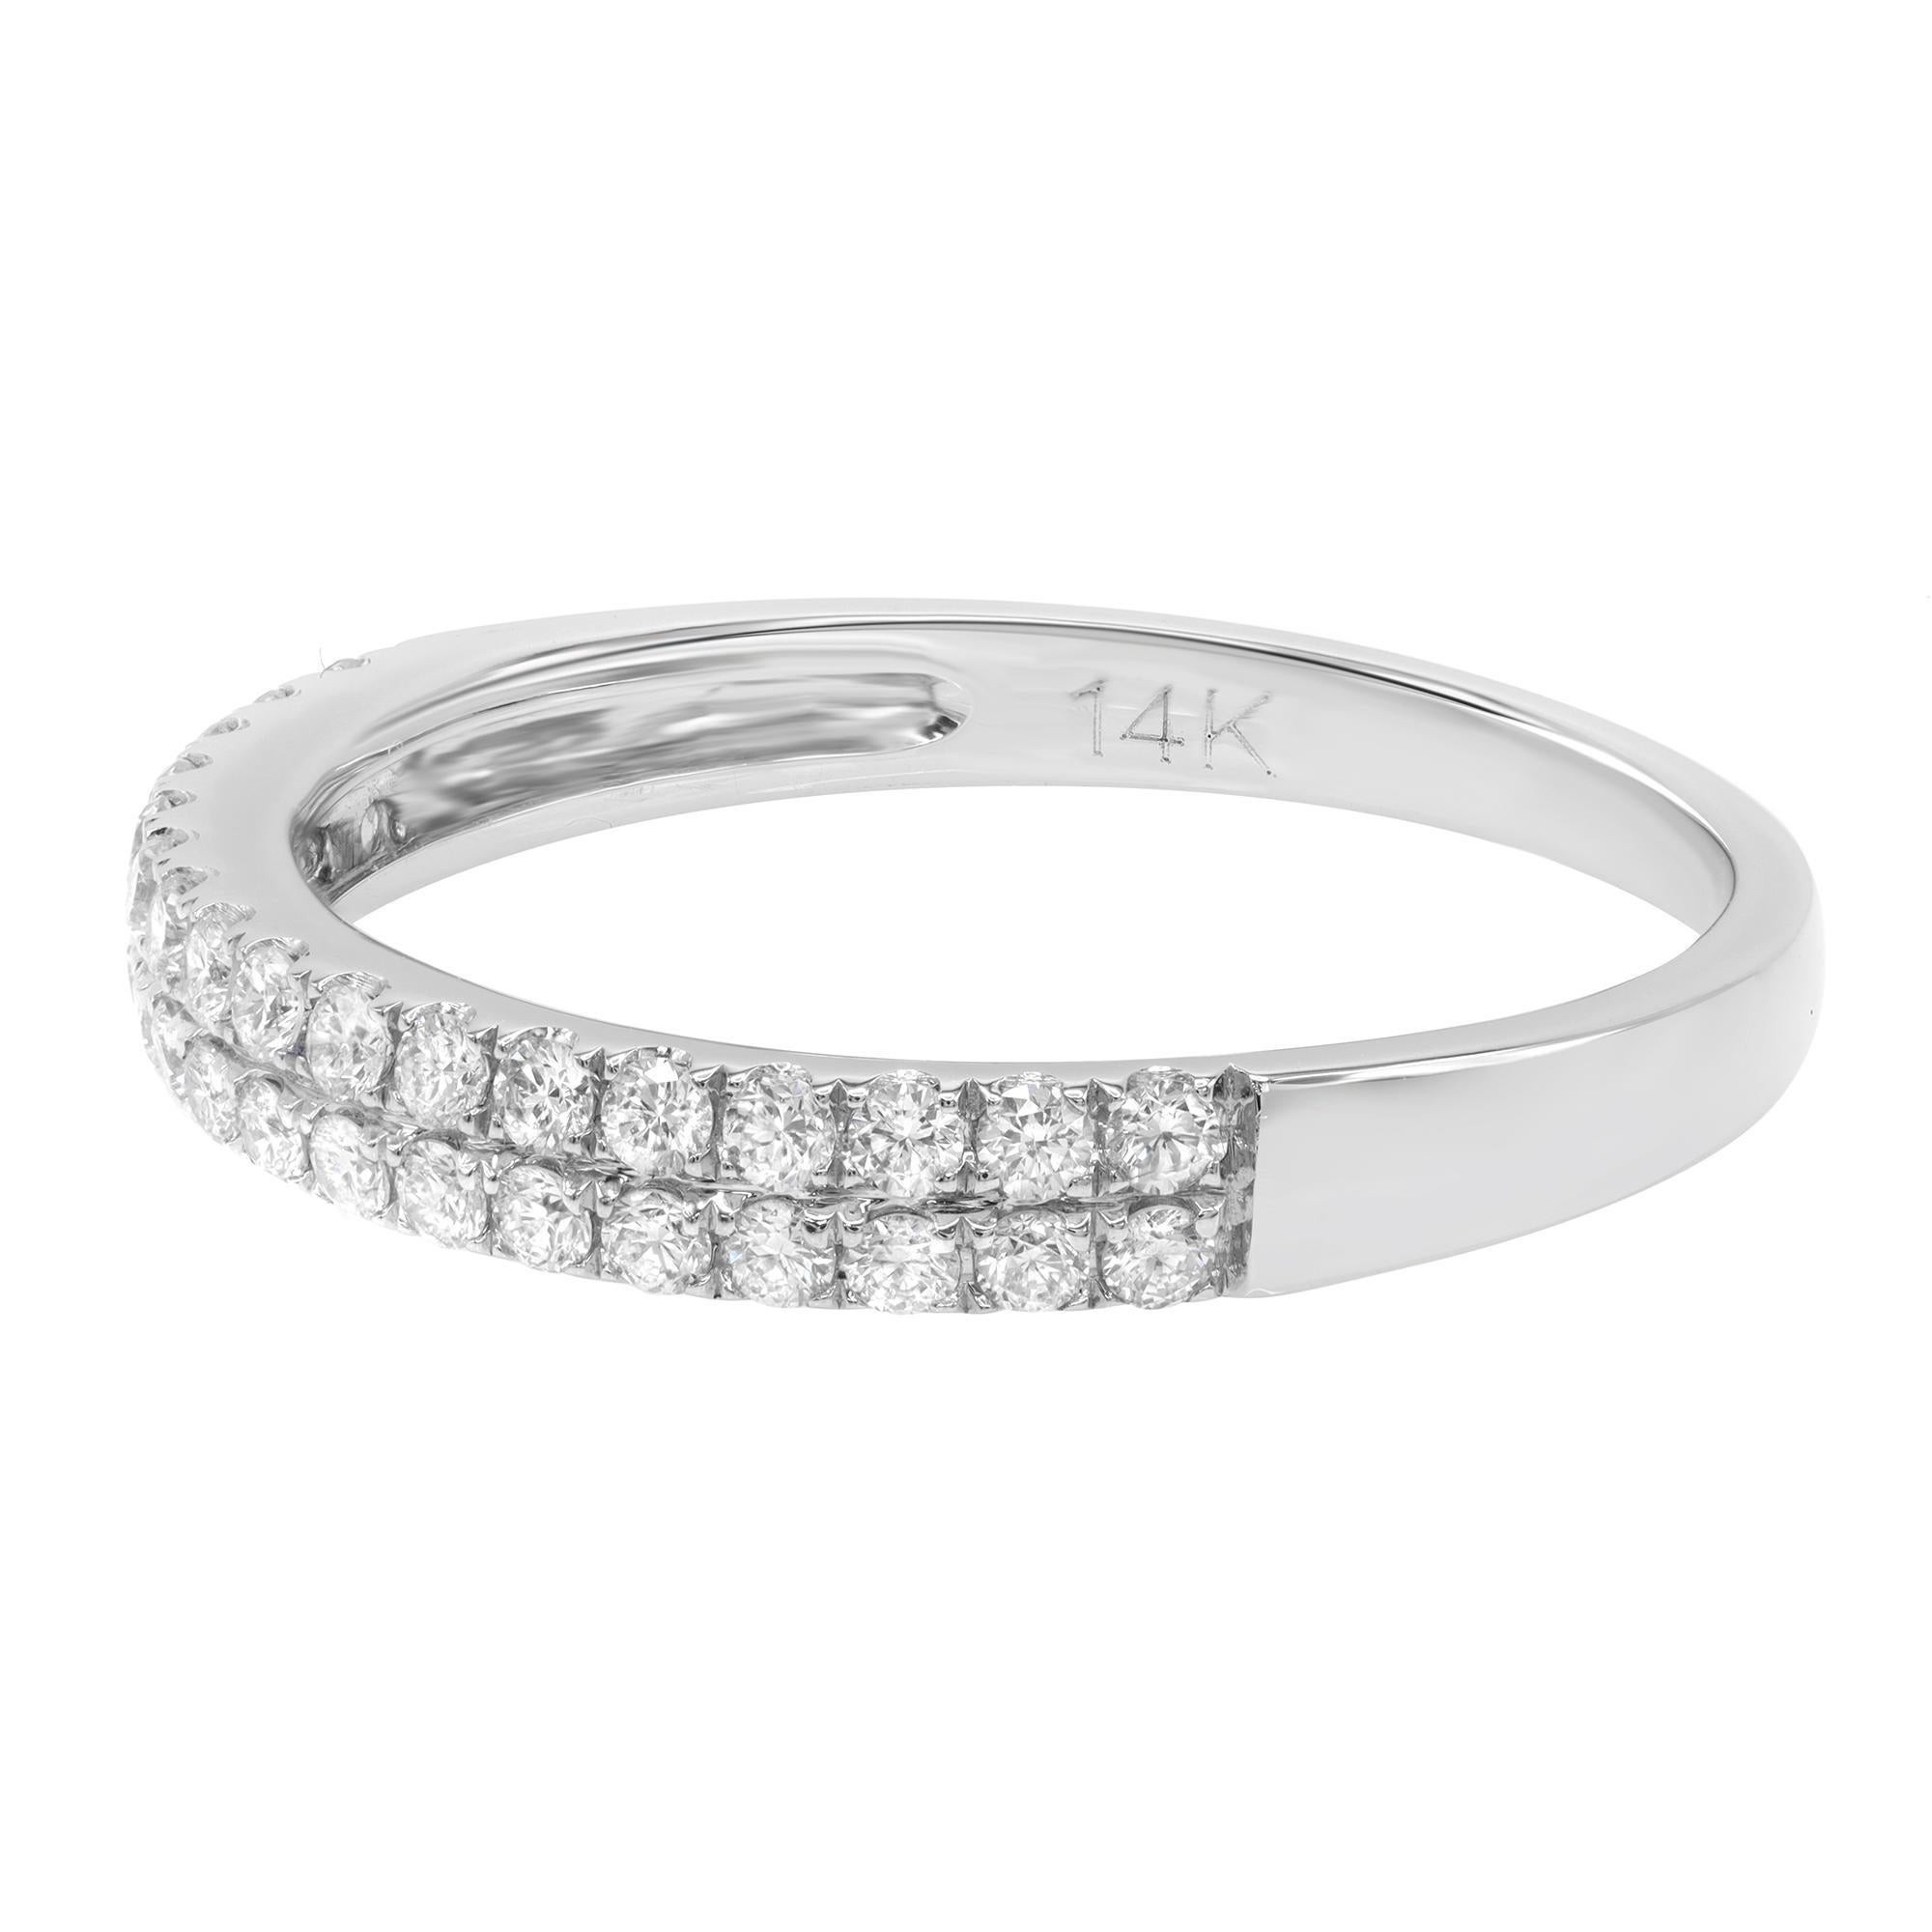 This 14 karat white gold wedding band features 34 sparkling round pave set diamonds at approximately 0.37 carat total weight. Each stone has been hand-matched to display consistent fire and brilliance. Diamond color G-H and VS-SI clarity. The band